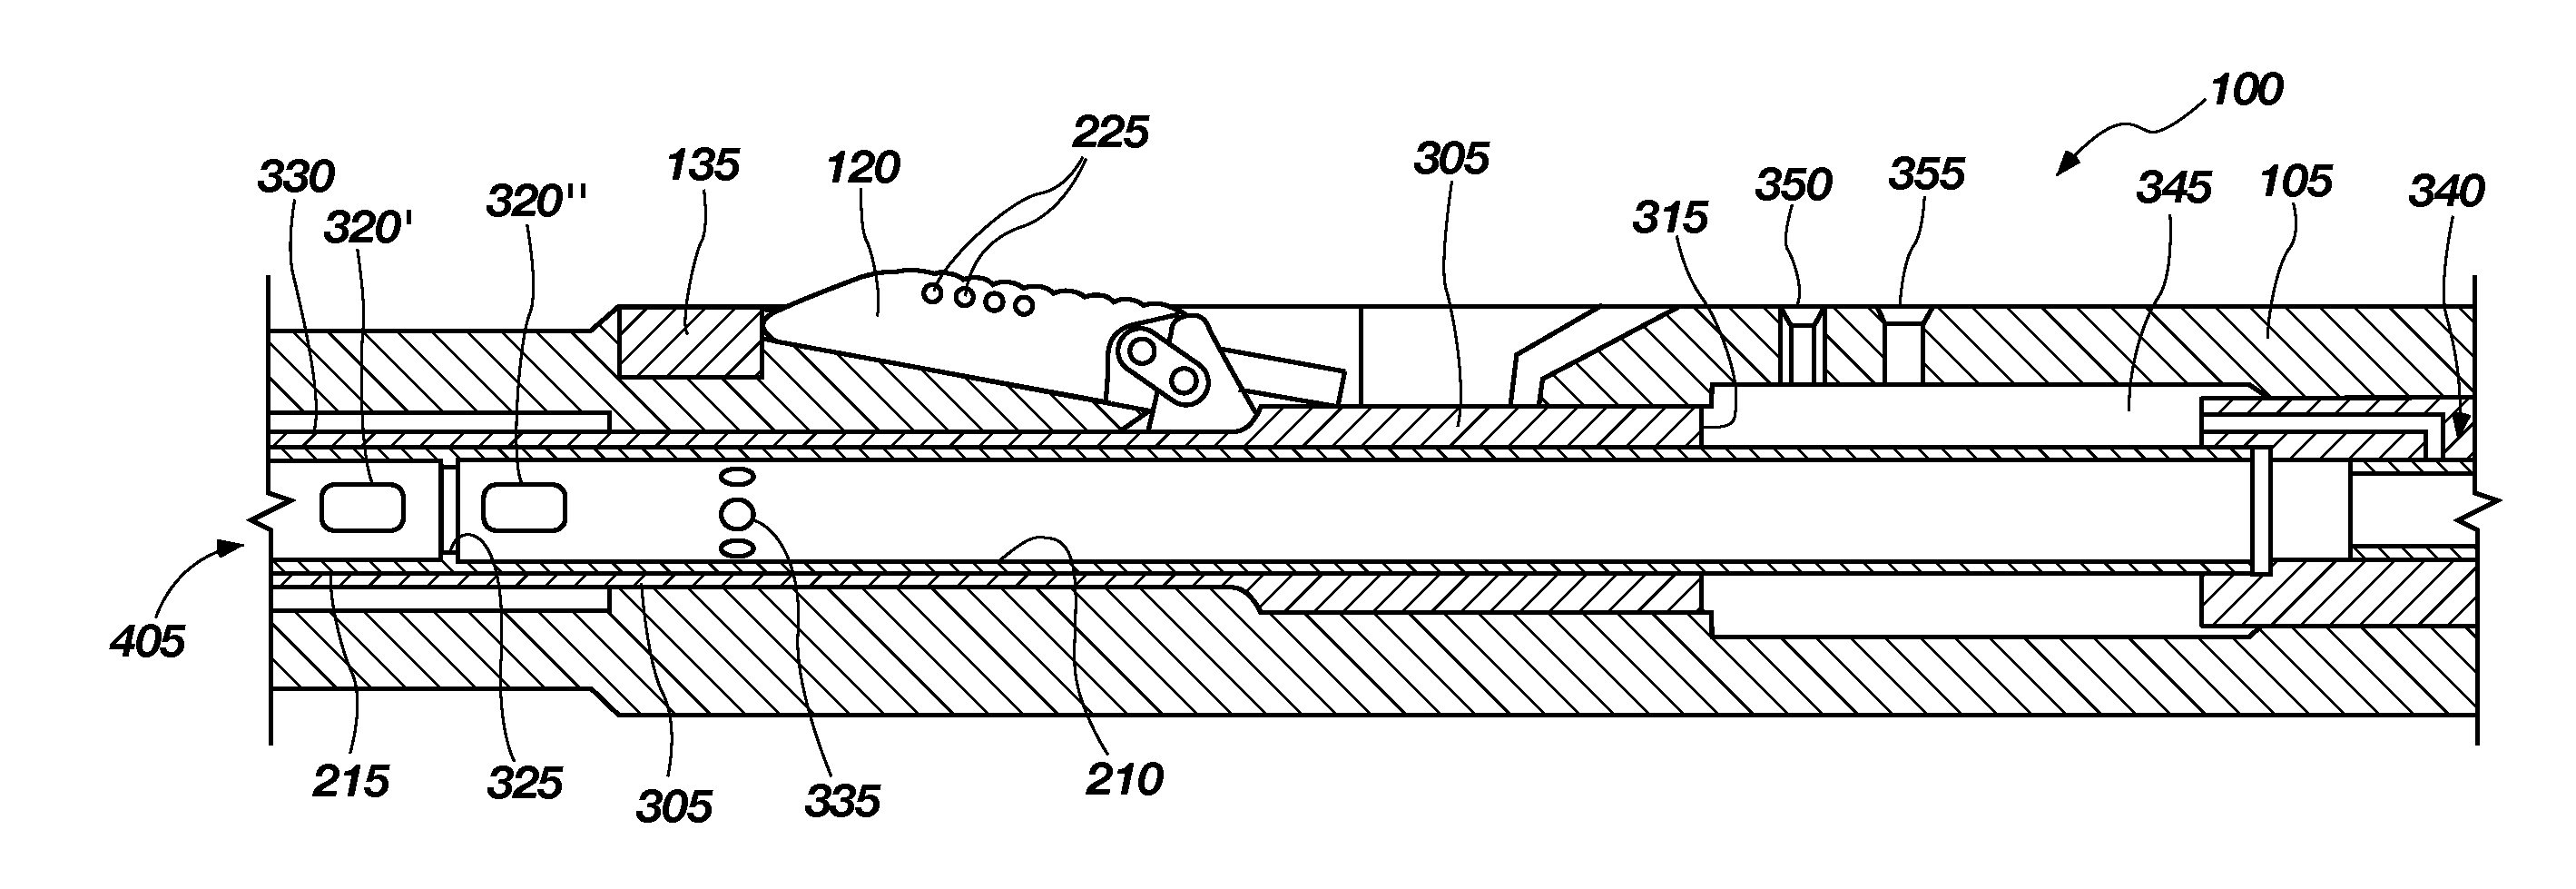 Remotely controlled apparatus for downhole applications and methods of operation